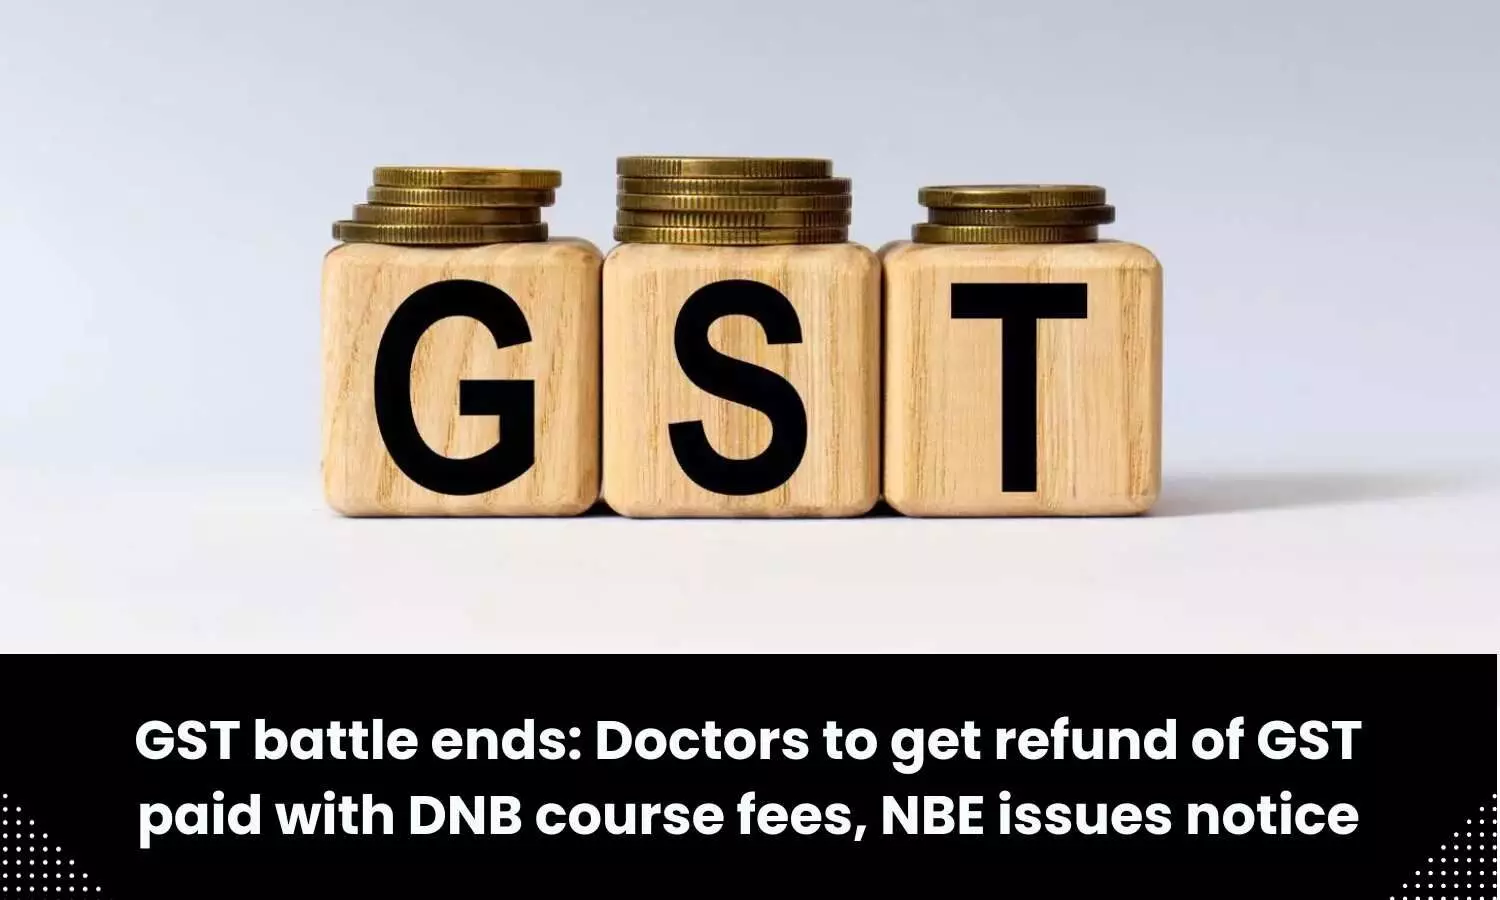 Doctors to get refund of GST paid with DNB course fees, NBE issues notice